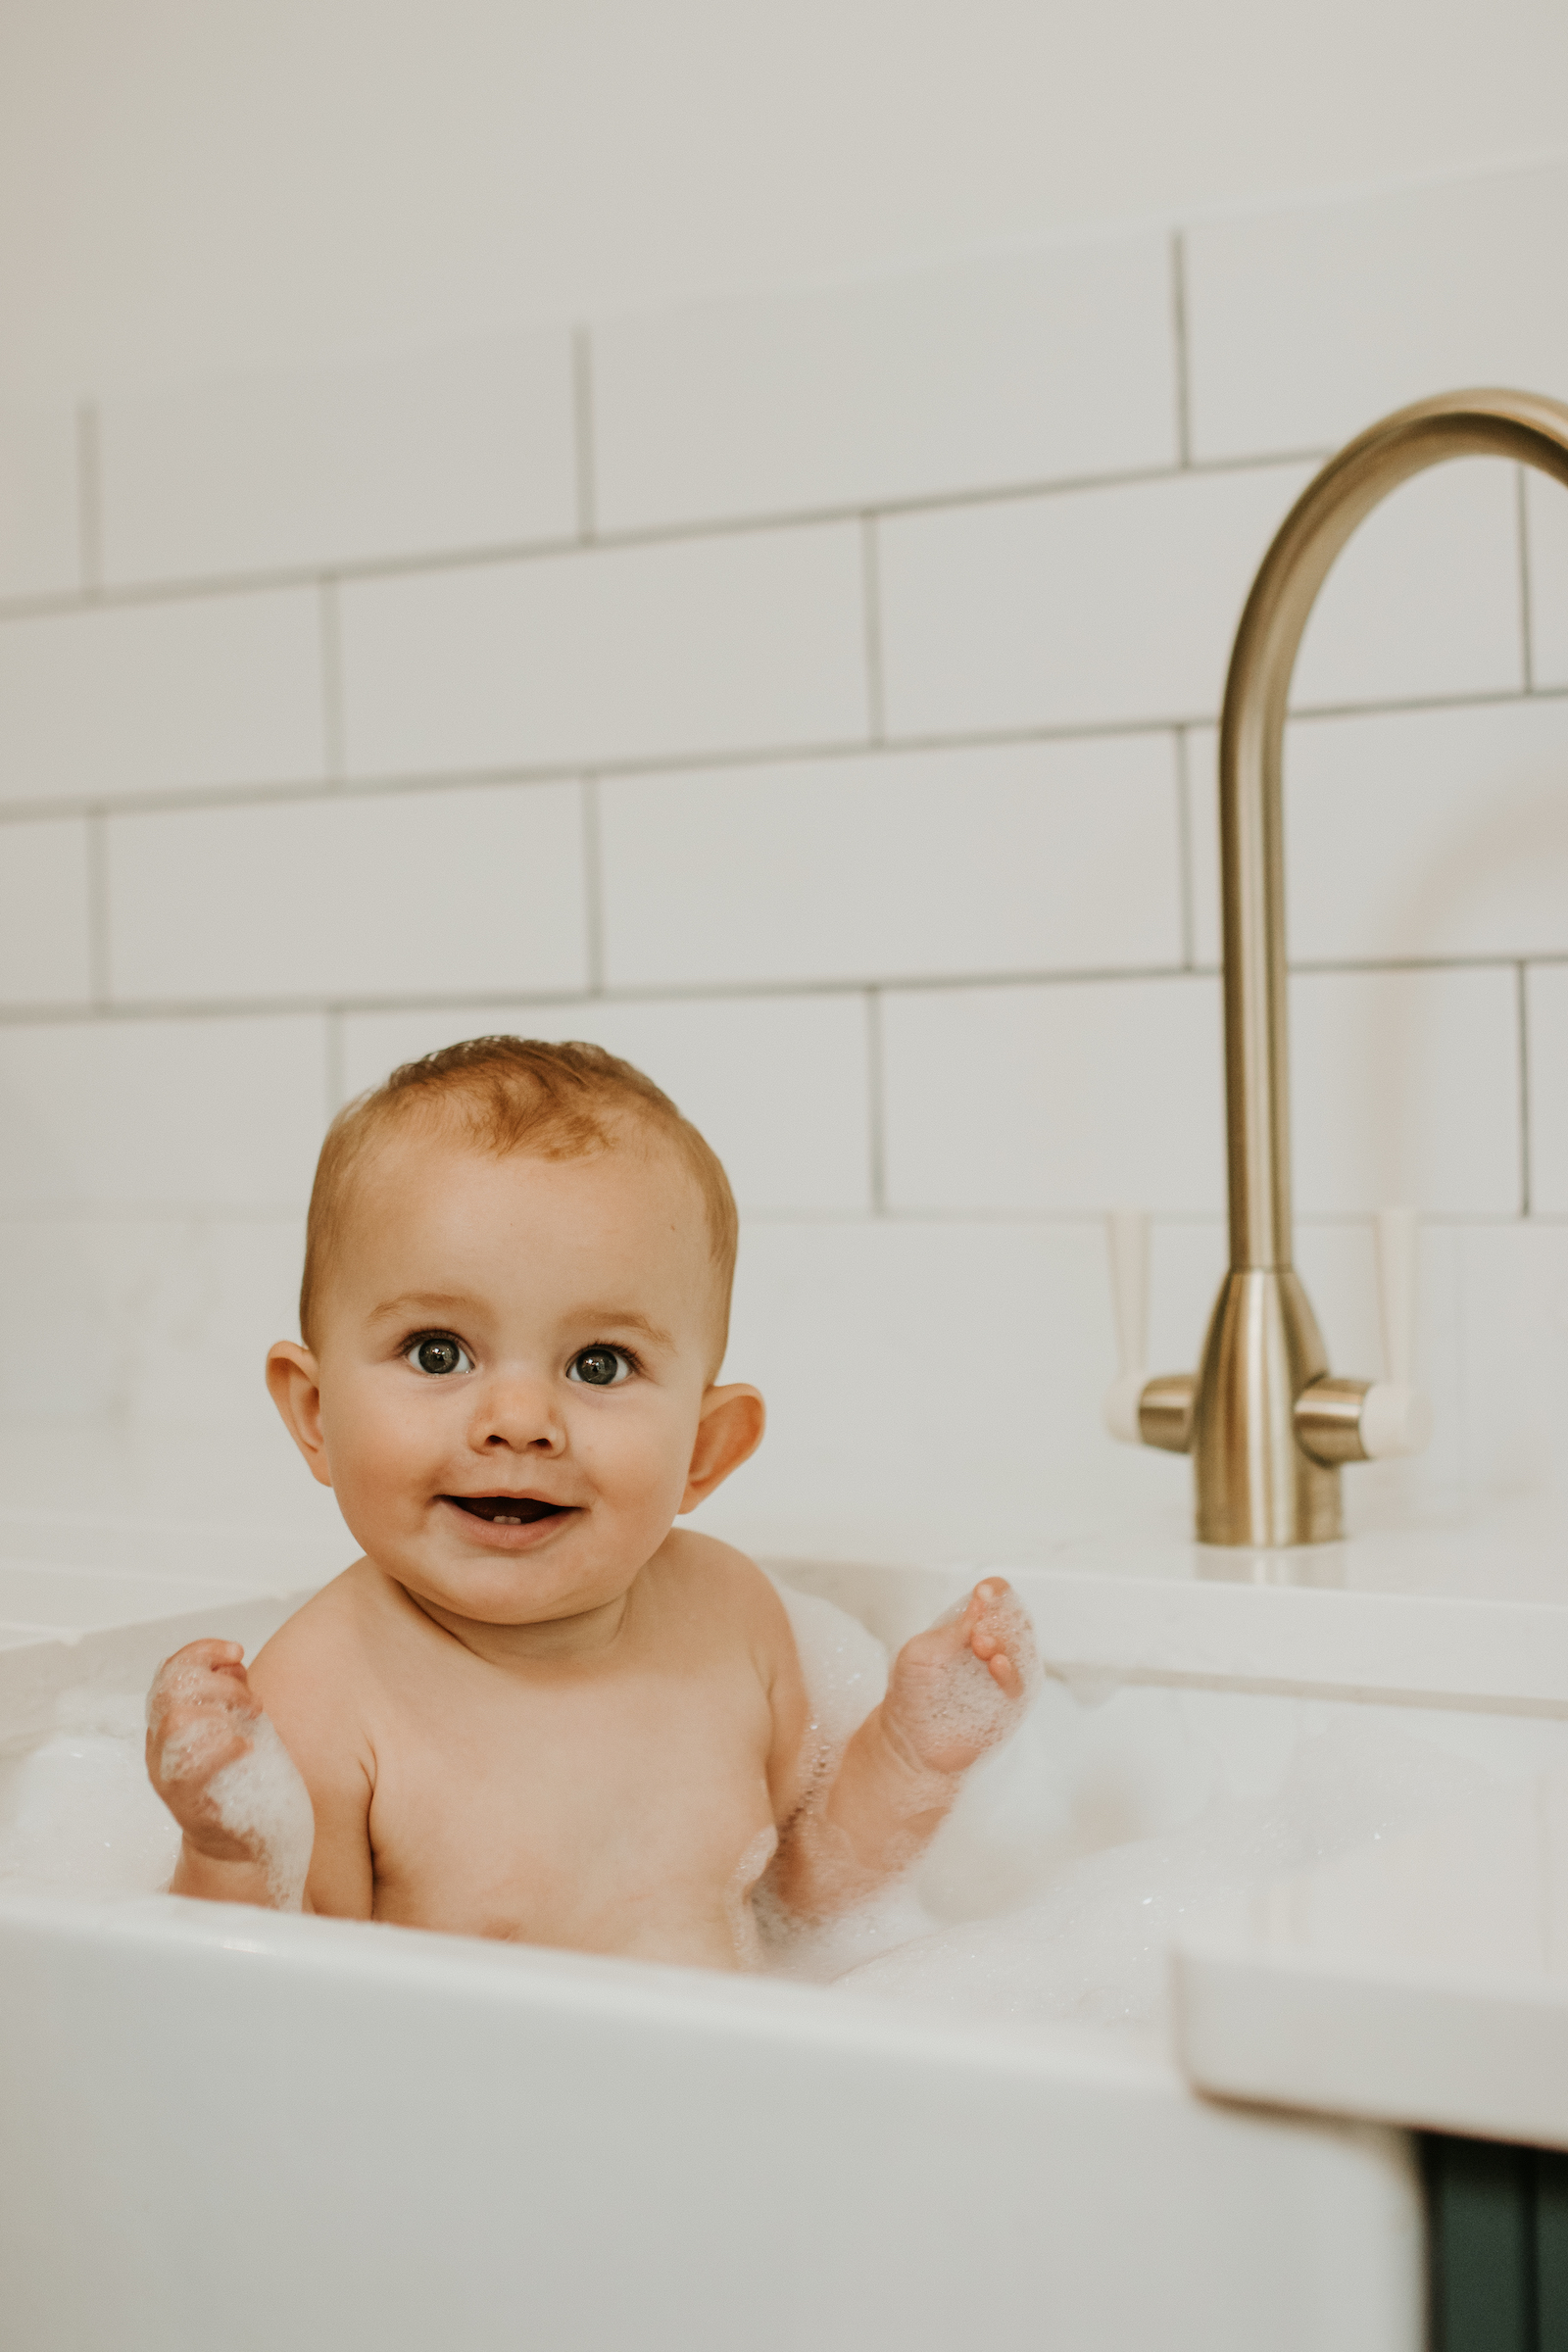 In home baby photography session. Baby is in the sink having a bath and smiling at the camera. 